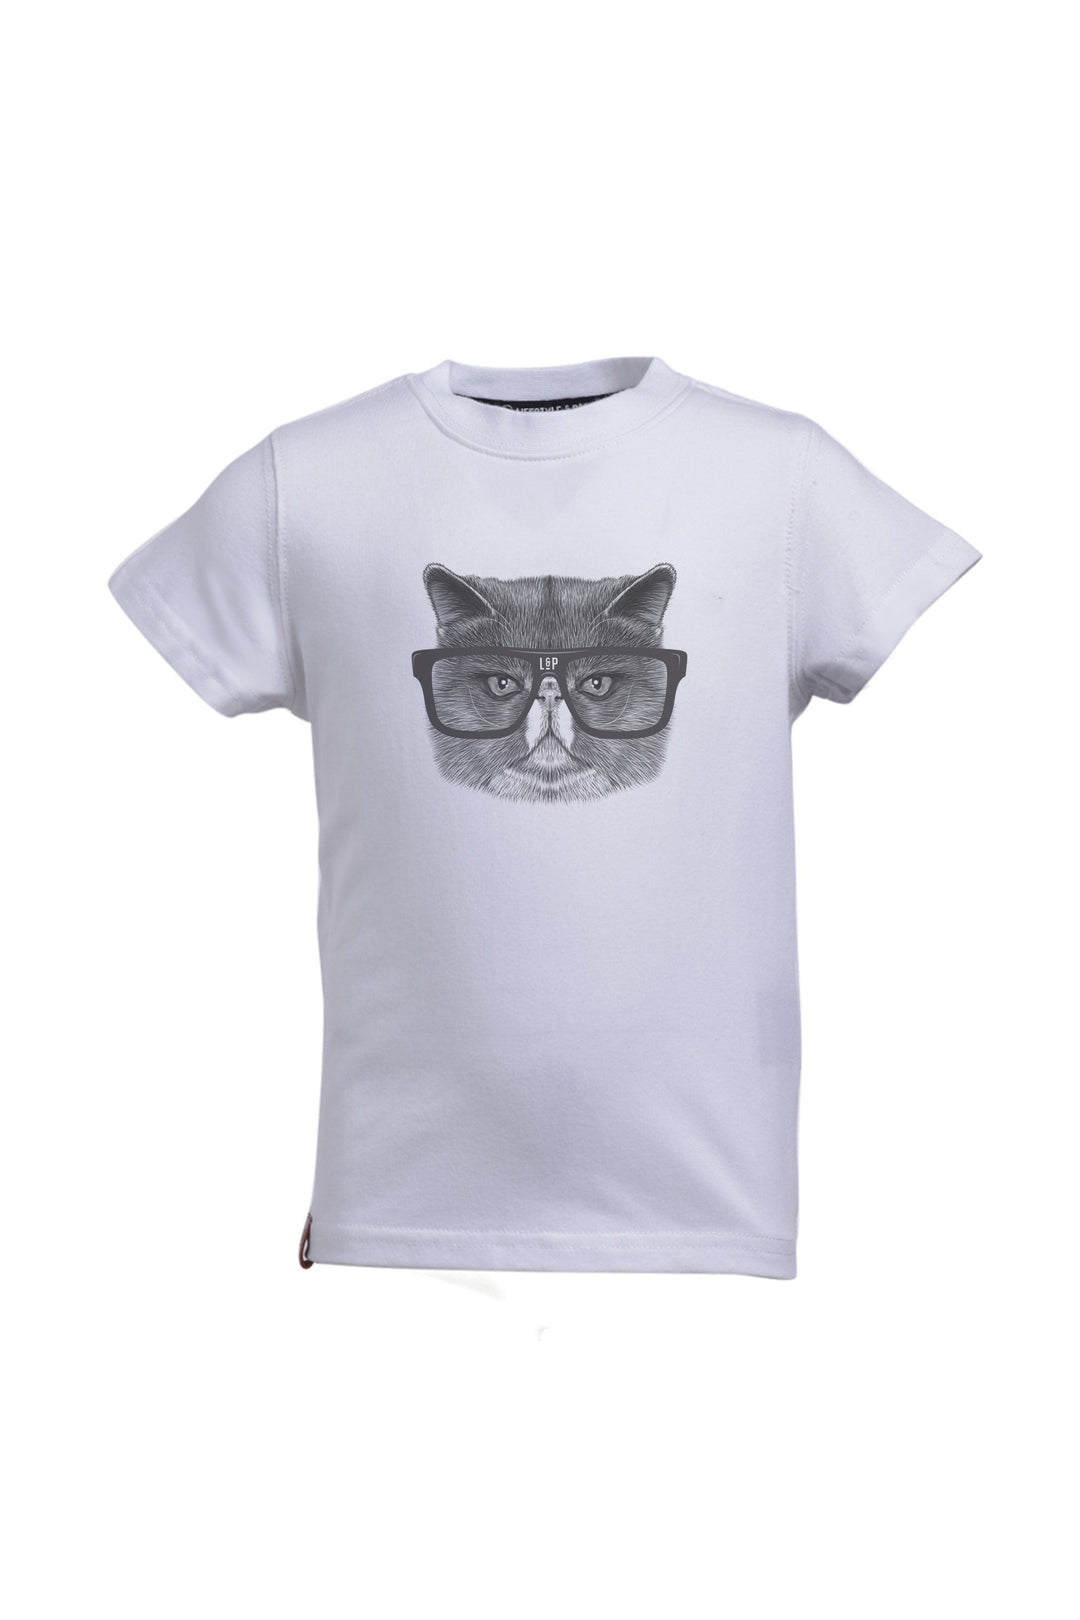 [Angry cat series] cotton short sleeve sweater [Junior]